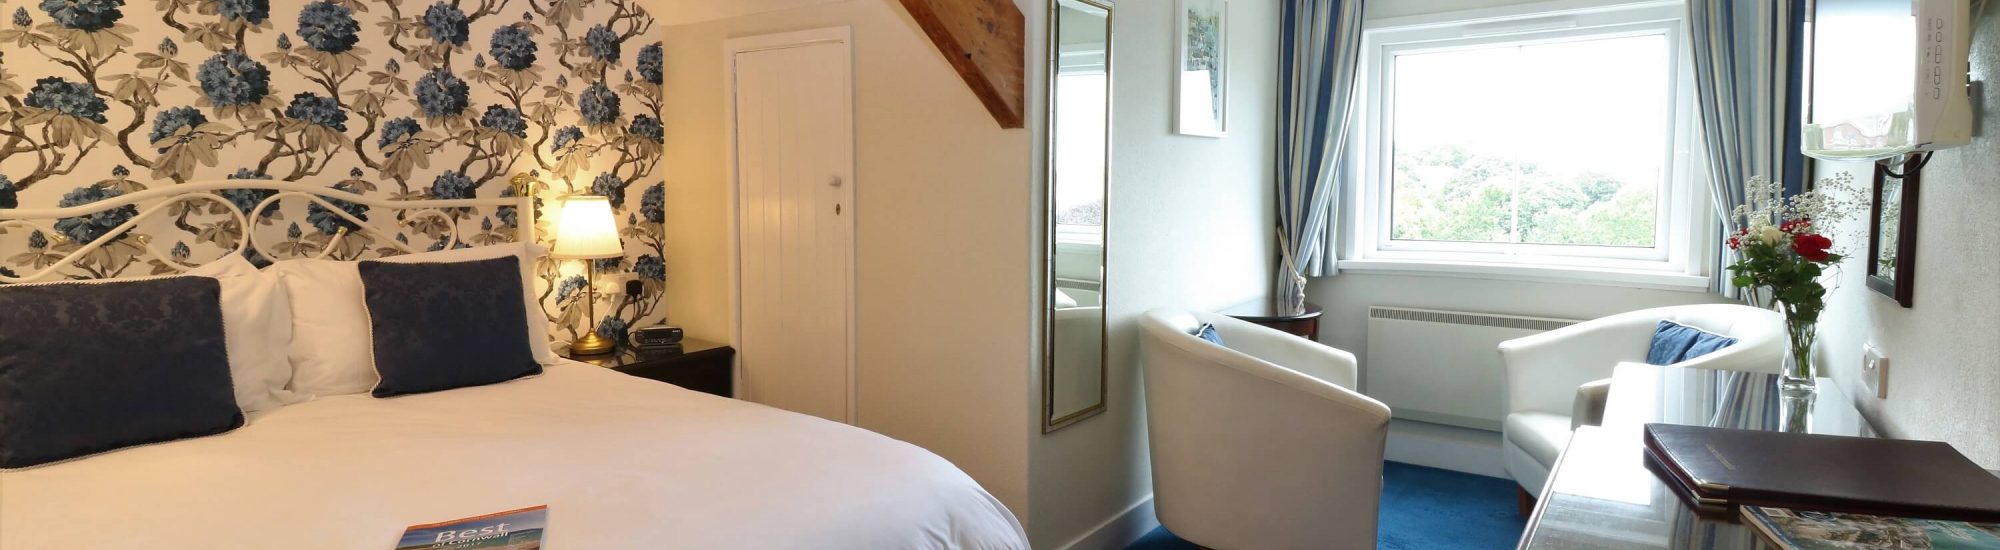 A superior double room on the upper floor